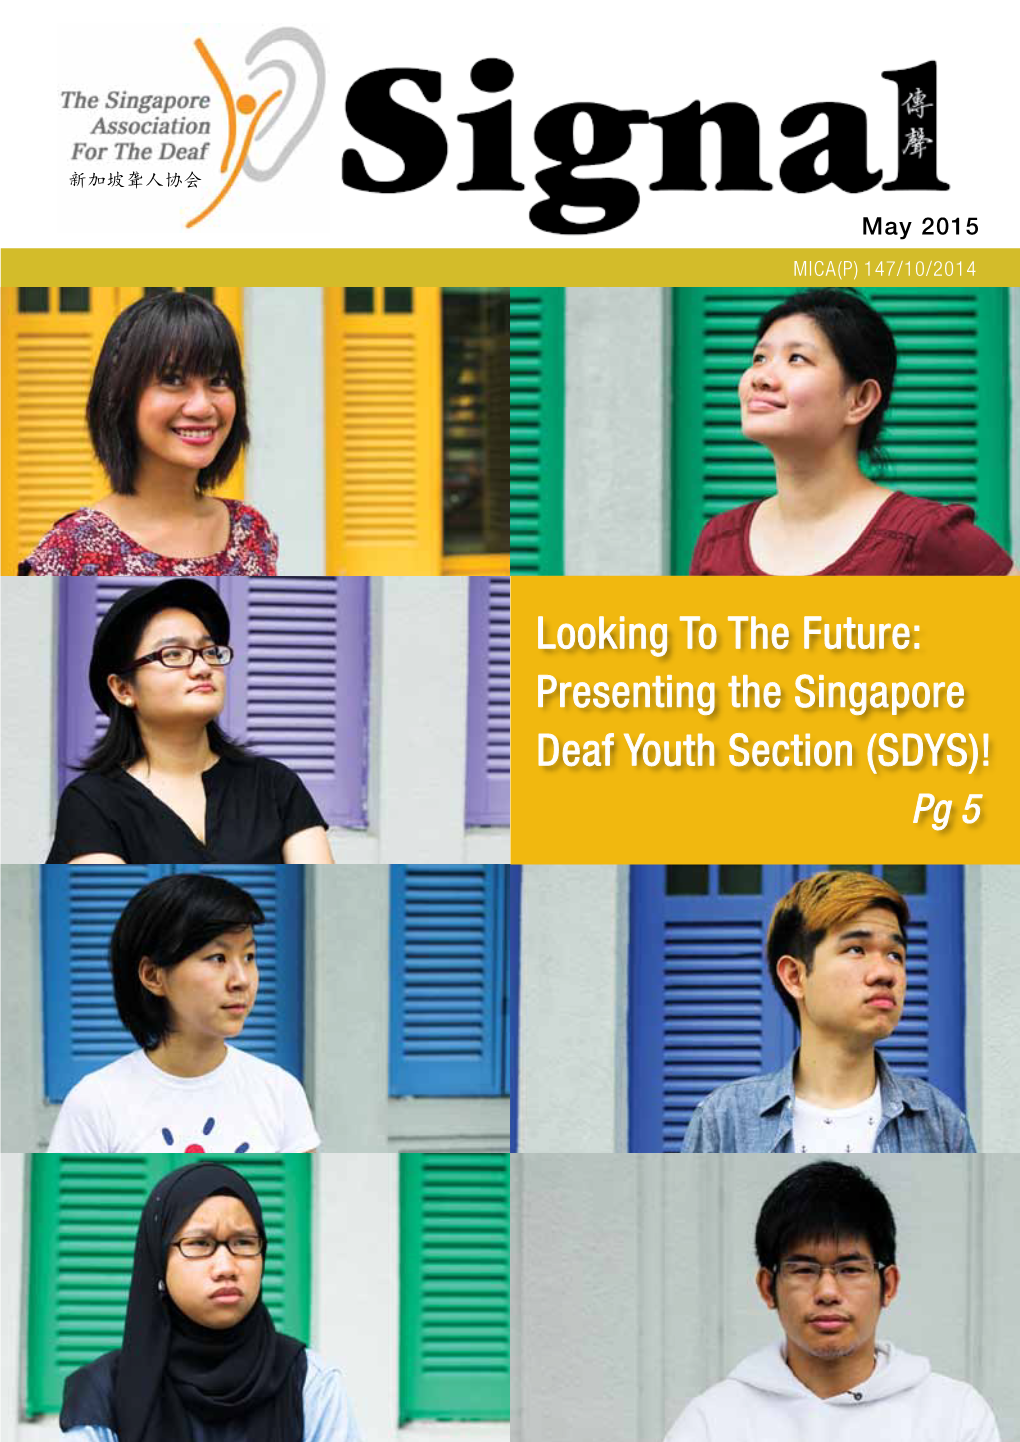 Presenting the Singapore Deaf Youth Section (SDYS)!